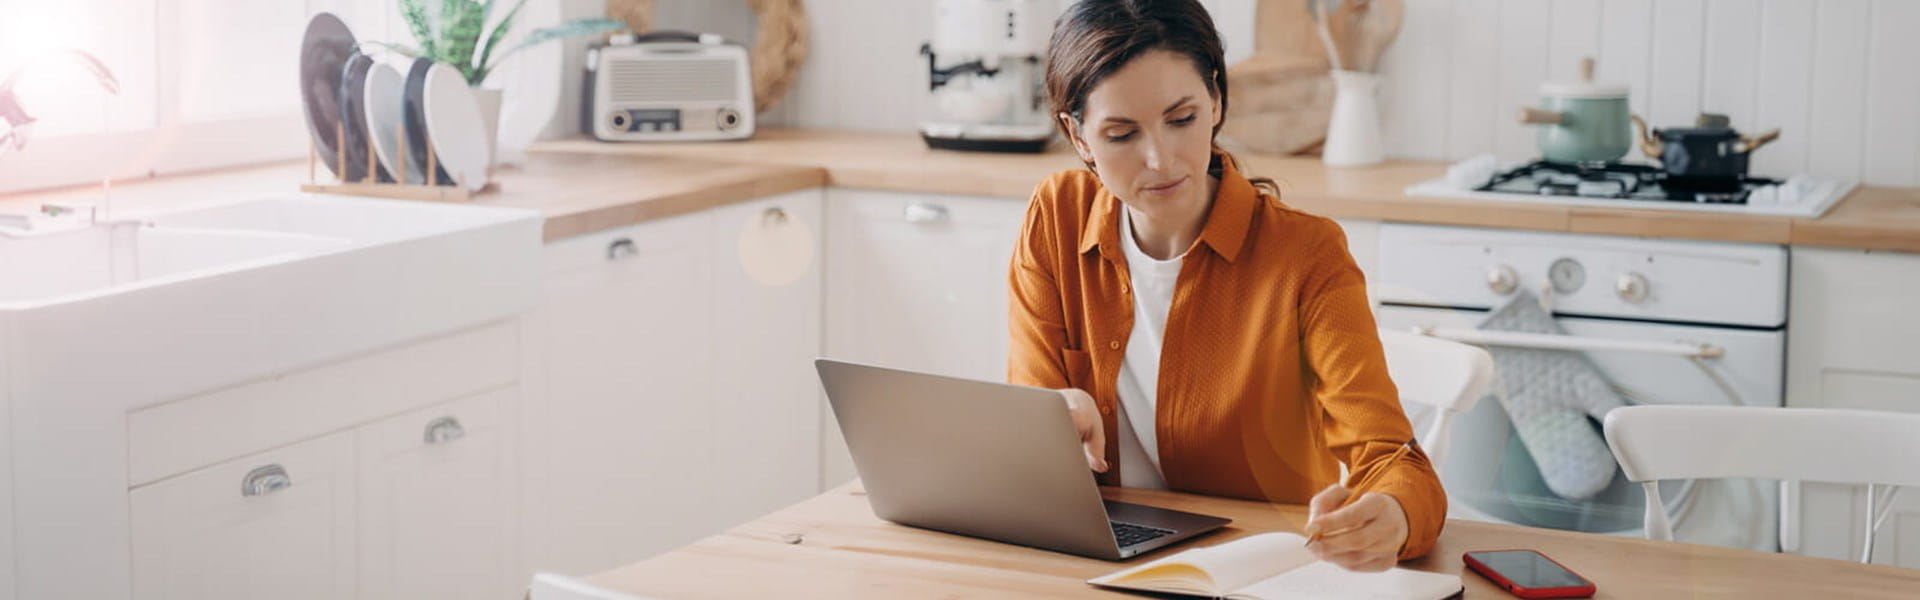 woman in orange shirt on her laptop taking notes in her kitchen